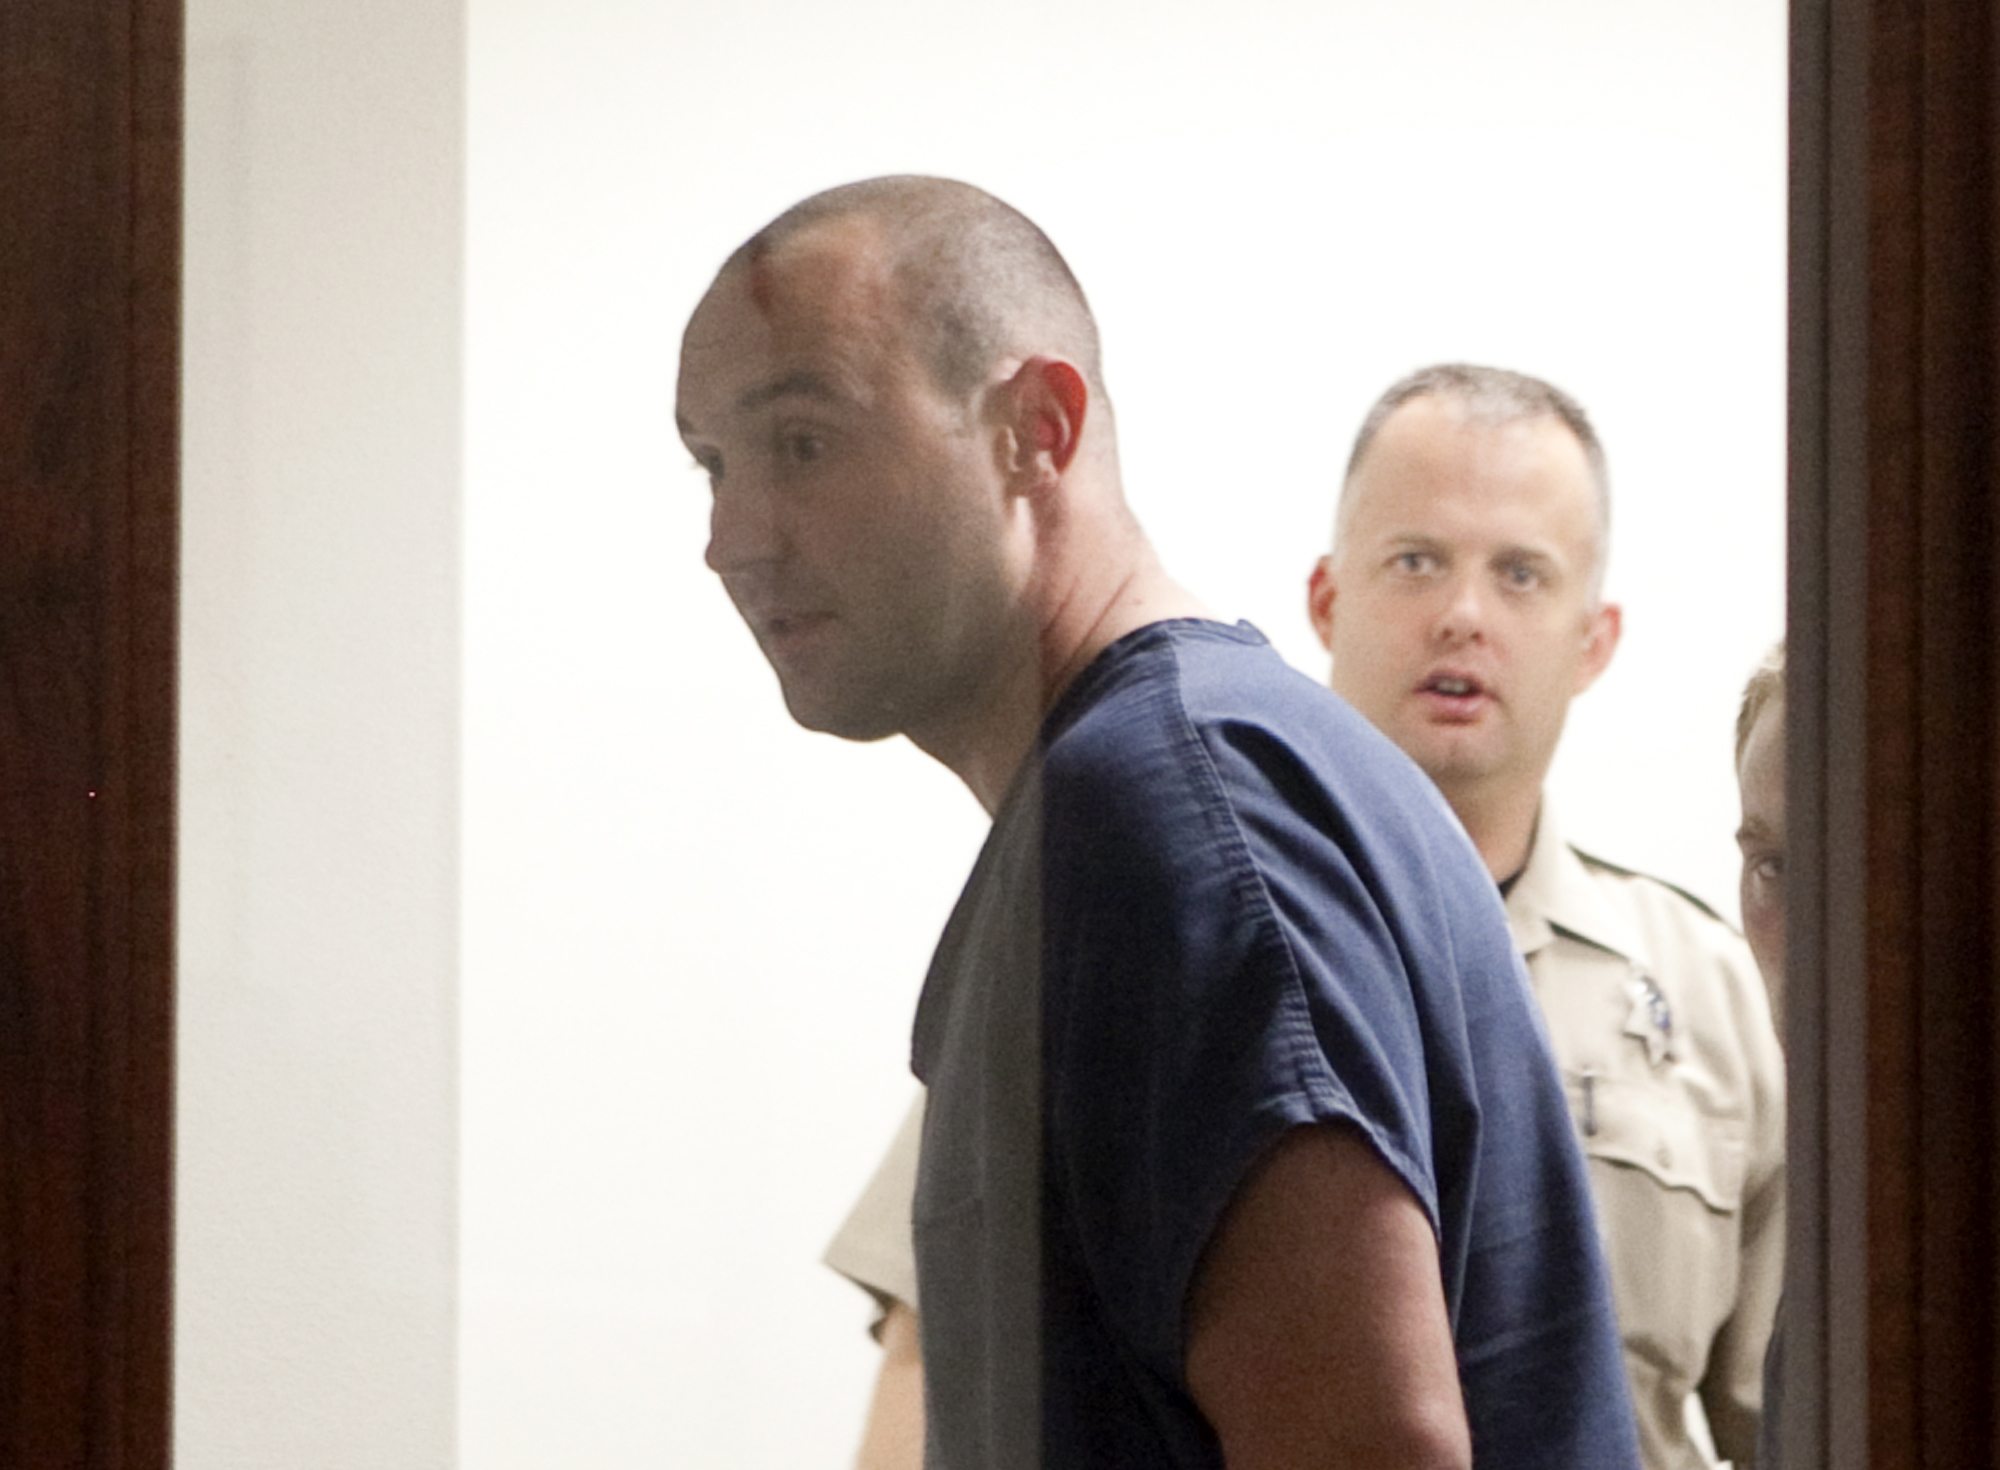 Russell Amon was in arraingment court Tuesday morning.